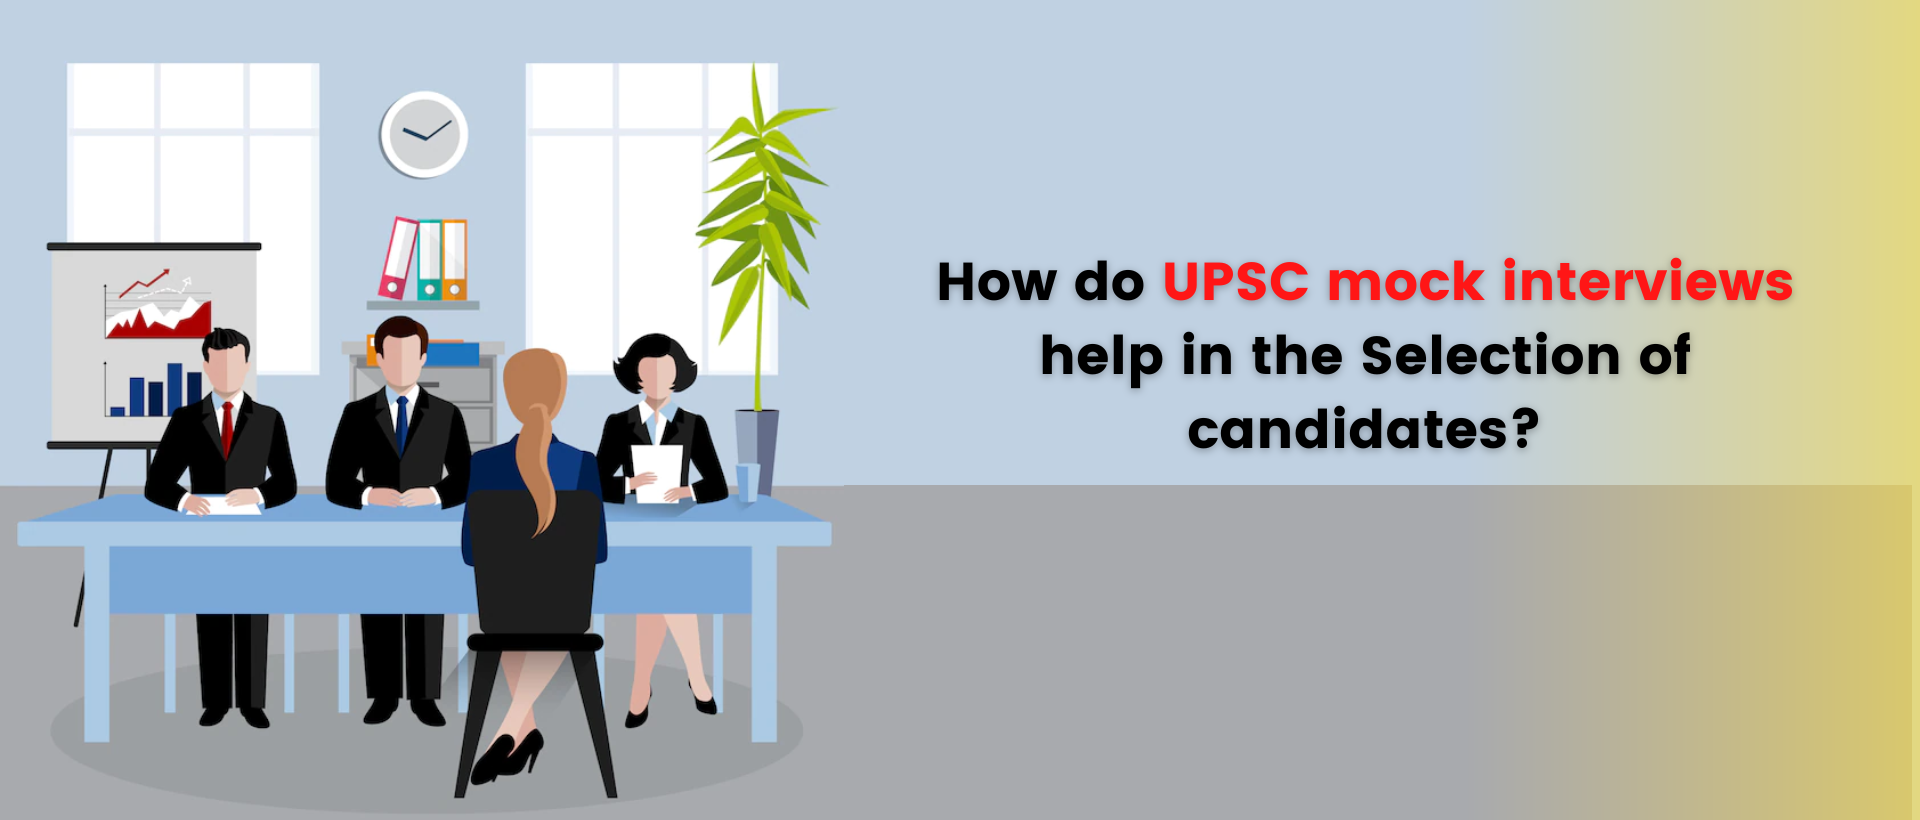 How do upsc mock interviews help in the selection of candidates?